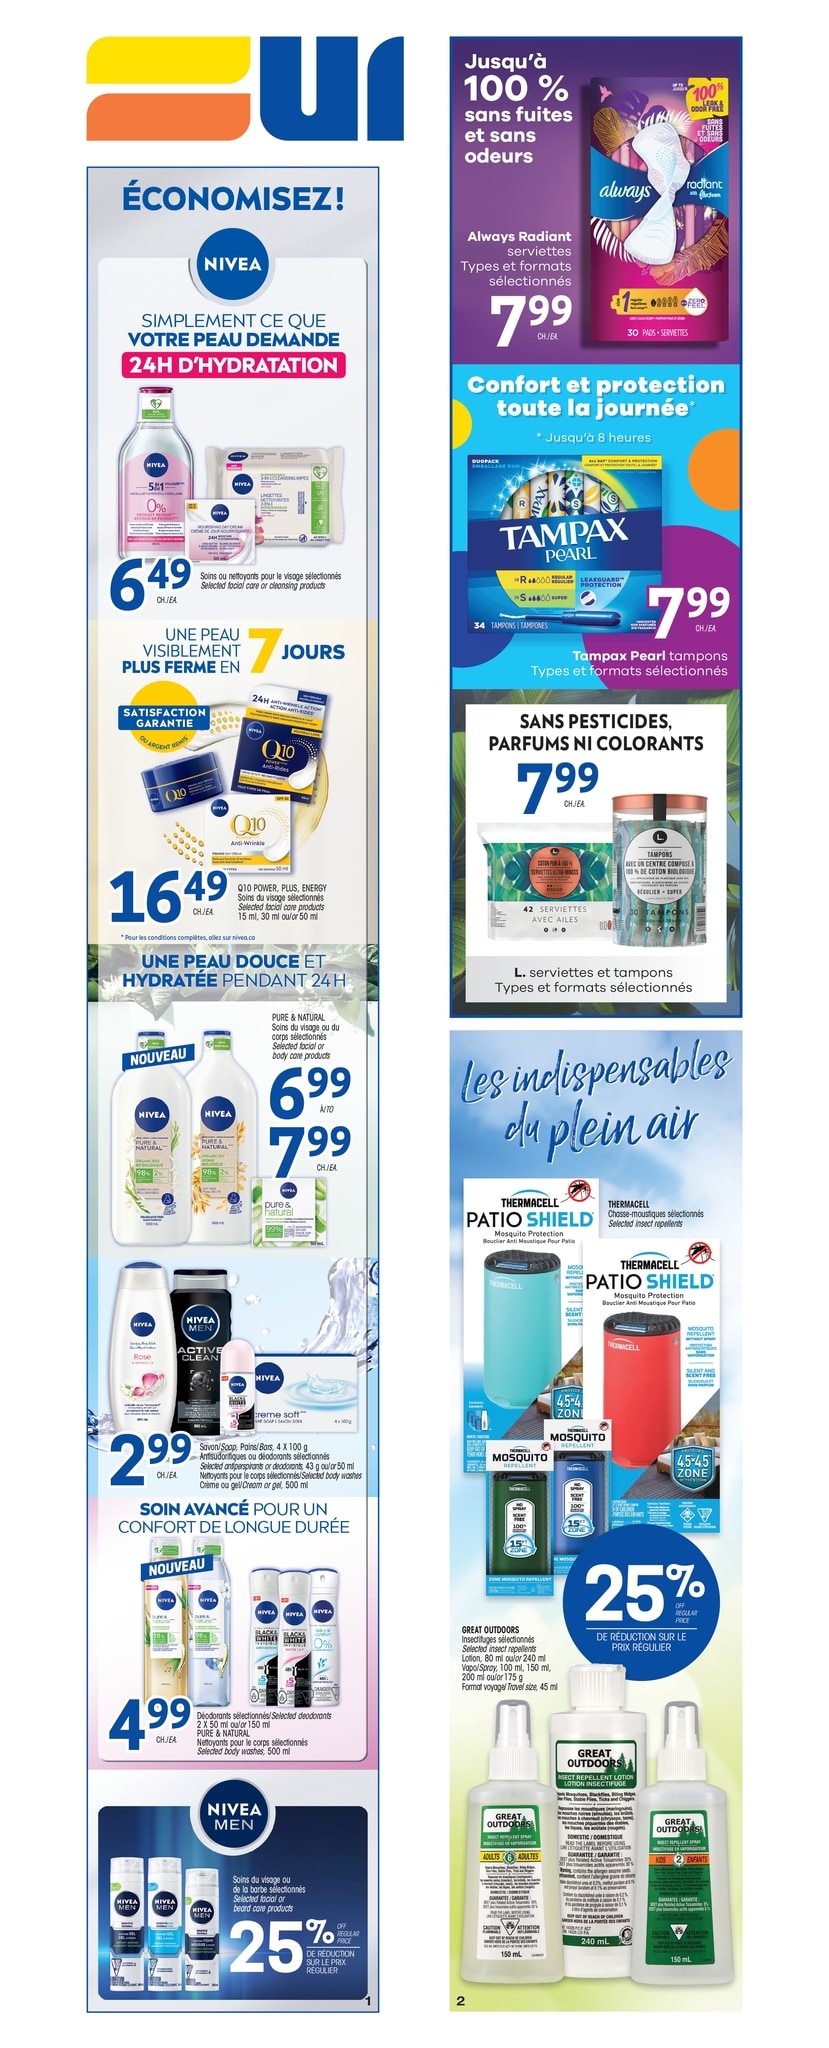 Uniprix - Weekly Flyer Specials - Page 7